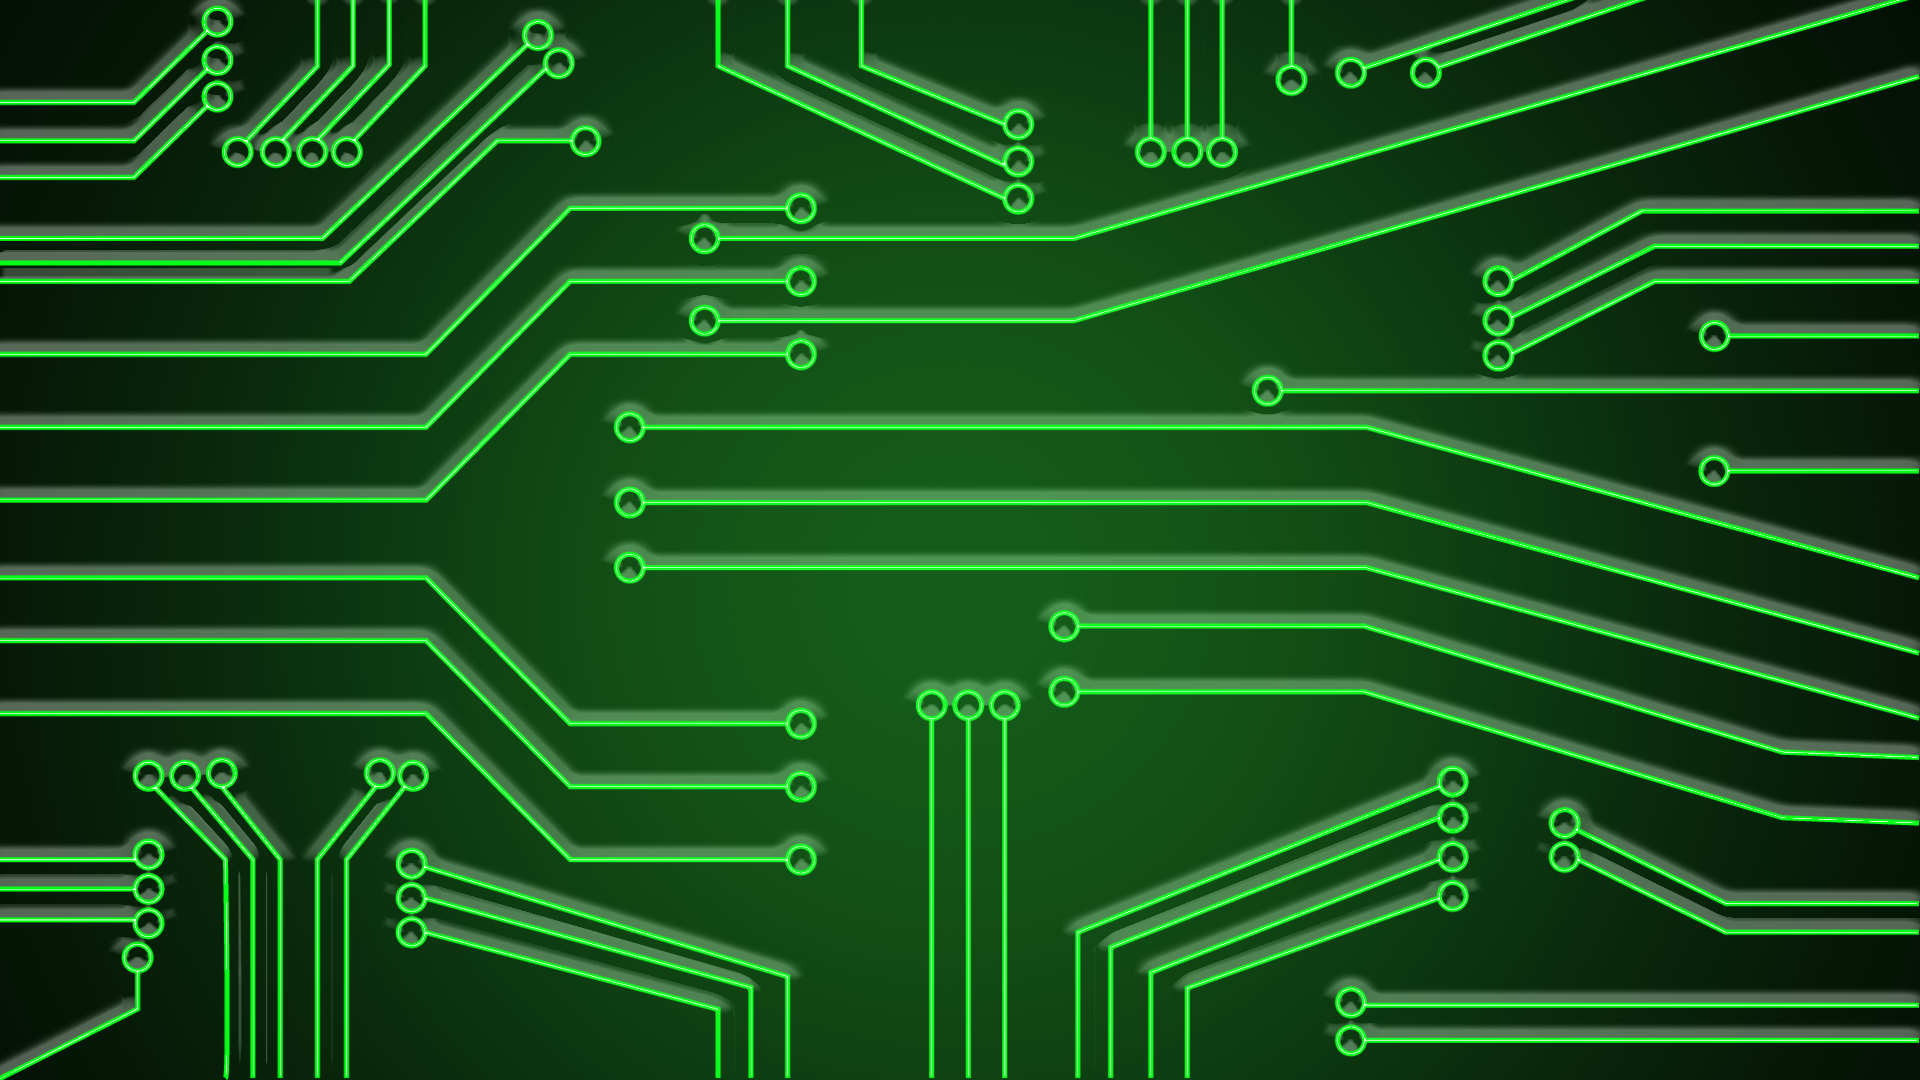 2560x14402020 Simple Green Circuit 2560x14402020 Resolution Wallpaper, HD  Hi-Tech 4K Wallpapers, Images, Photos and Background - Wallpapers Den